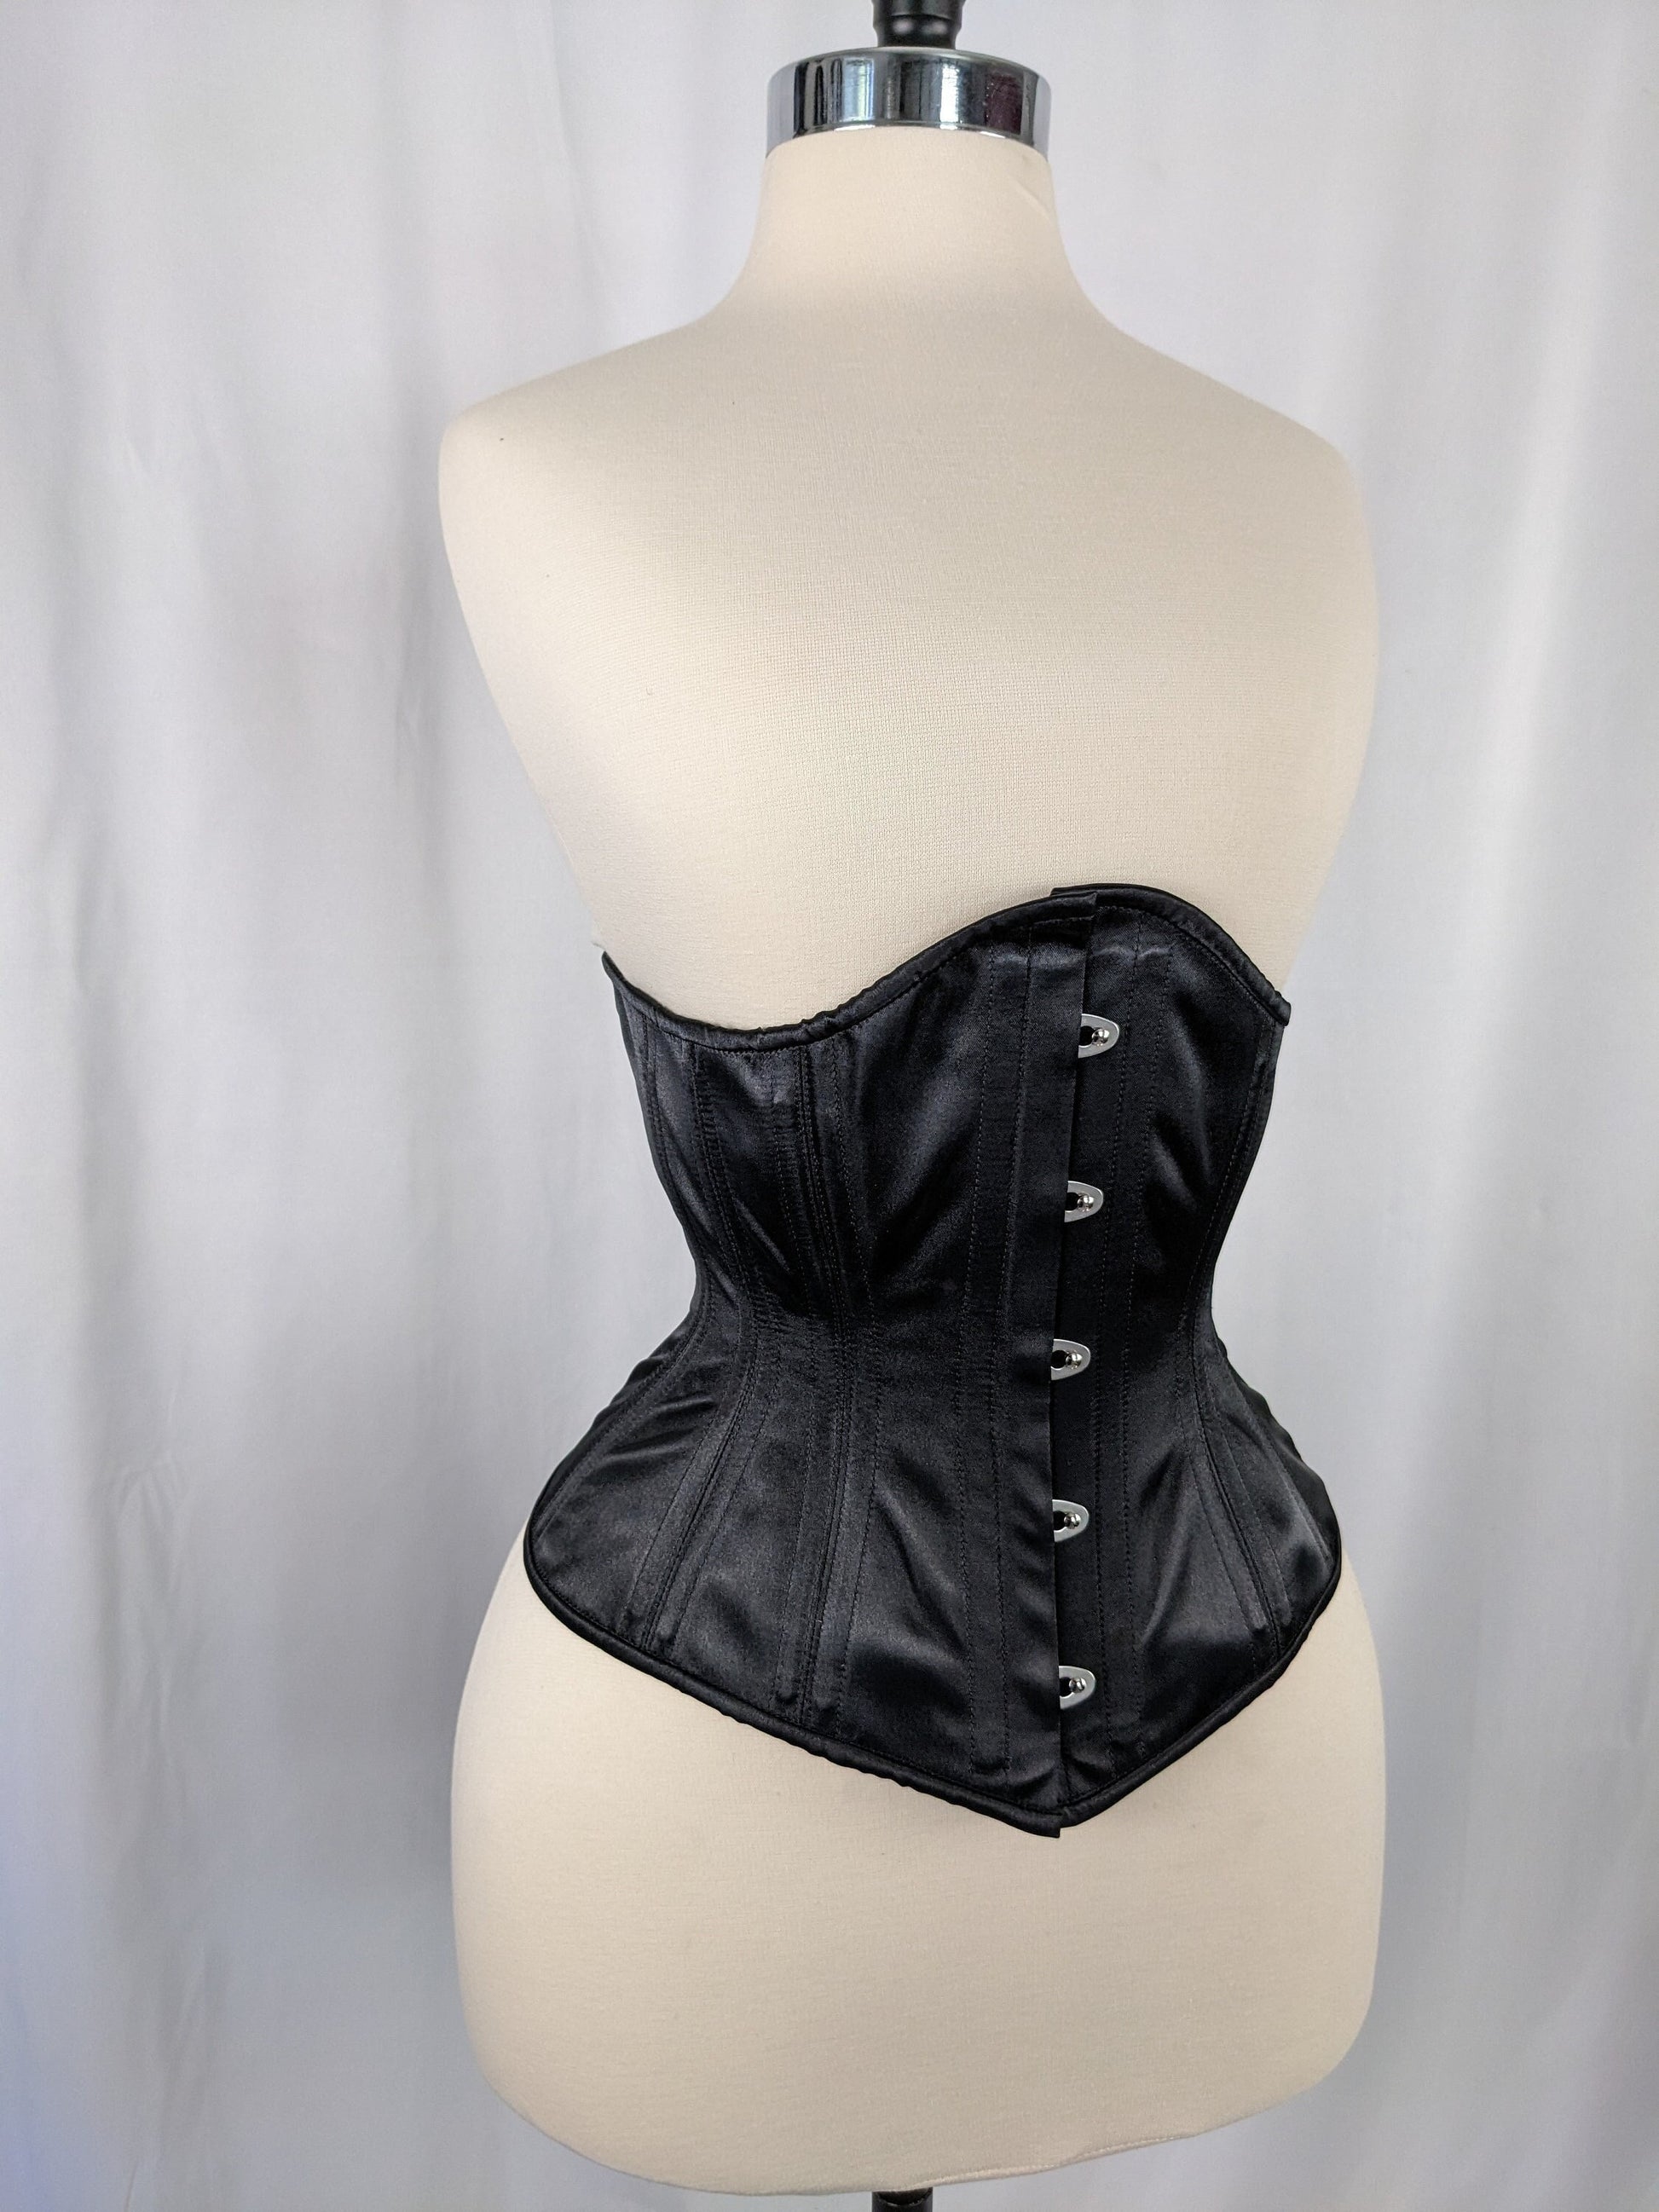 We have Custom Made Corset & Underbust Black Corset for you right here